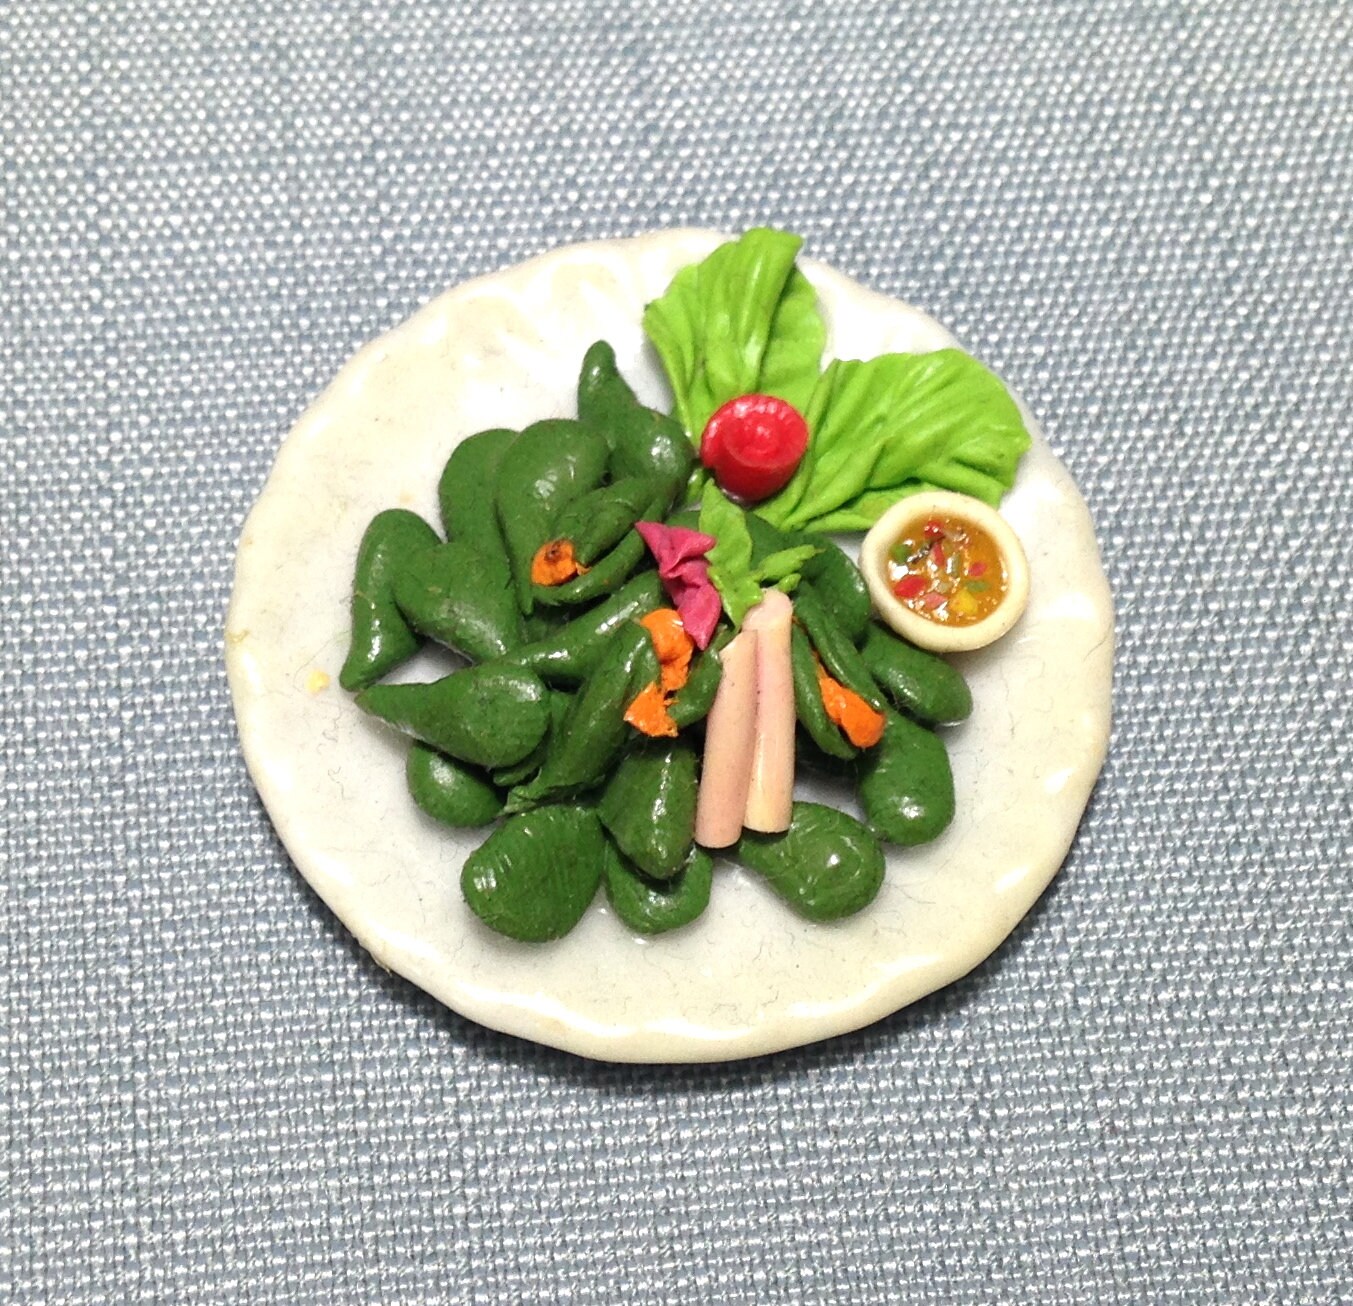 Mussels Seafood Shells Miniature Clay Polymer Food Supply Salad Sauce Cute Small Dish Plate Ceramic Dollhouse Jewelry Supplies Decor 1/12